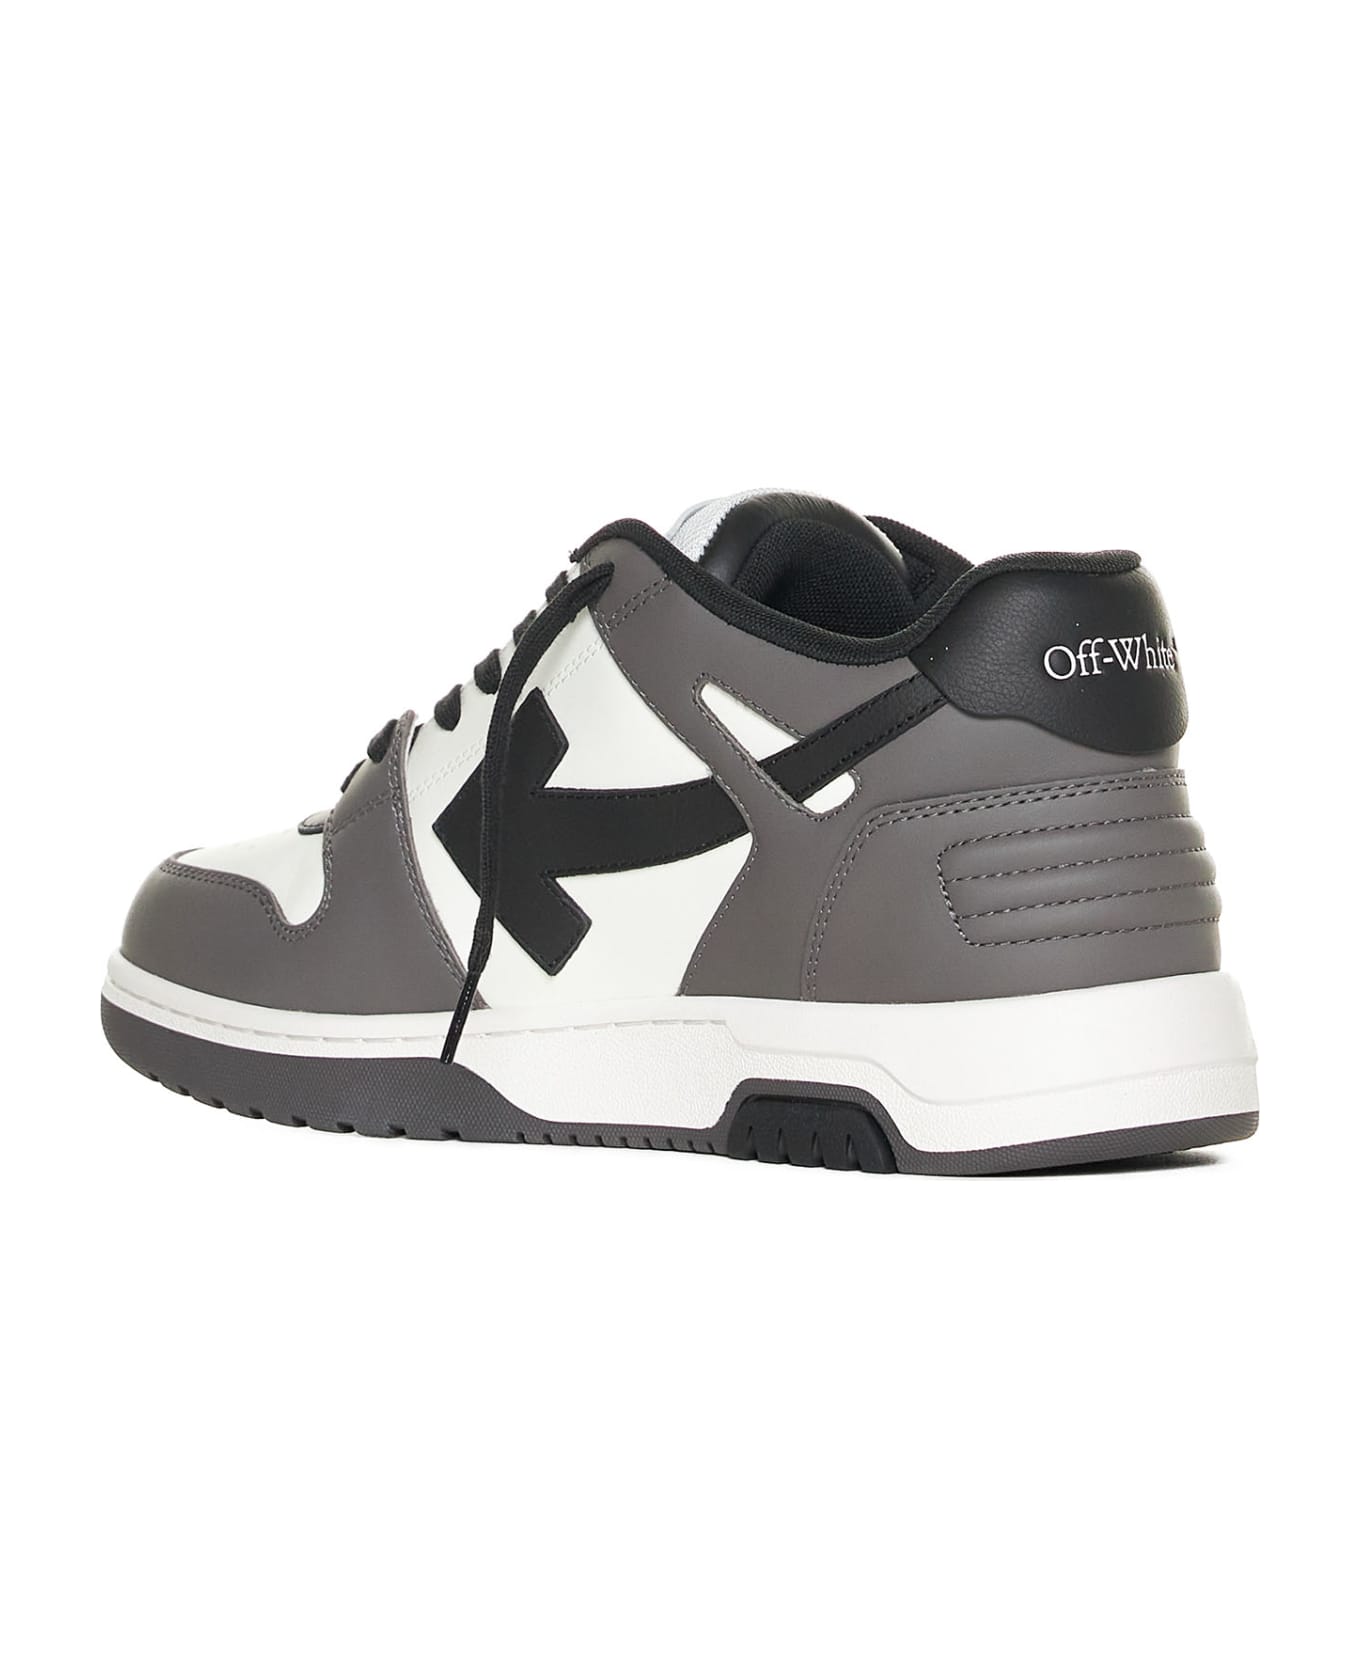 Off-White Out Of Office Low Top Sneakers - Dark grey black スニーカー